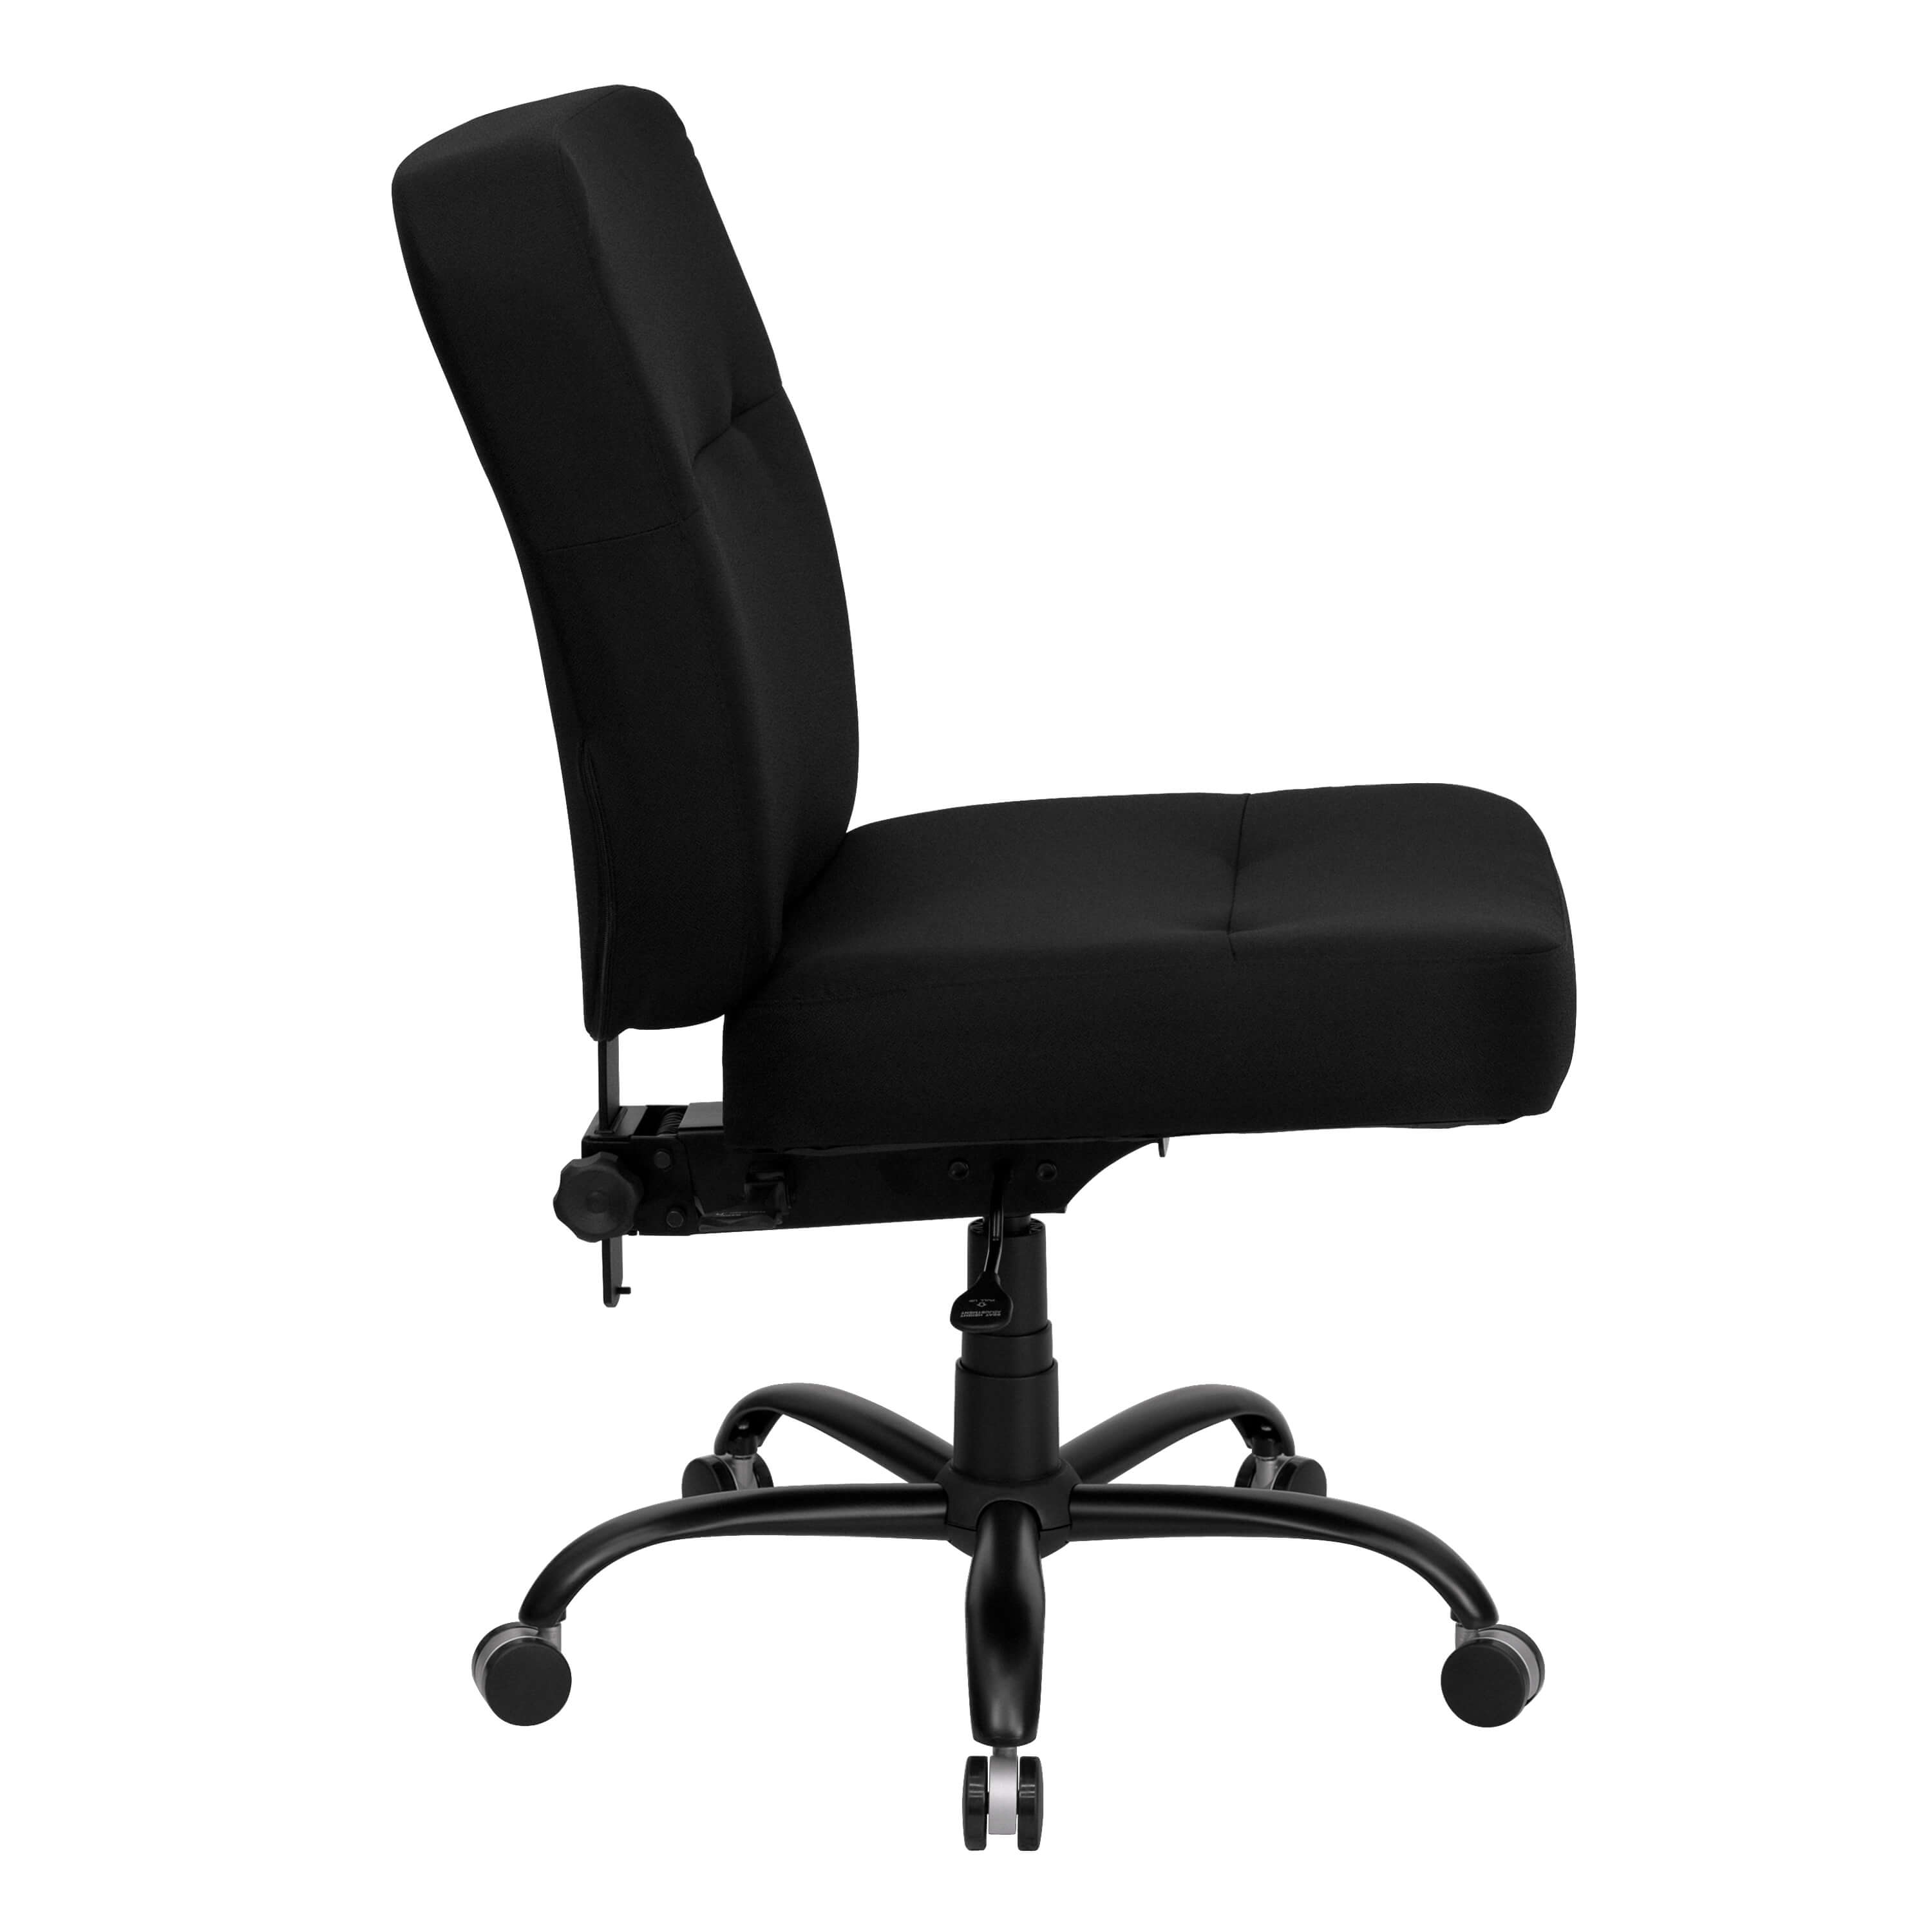 High weight capacity office chair side view